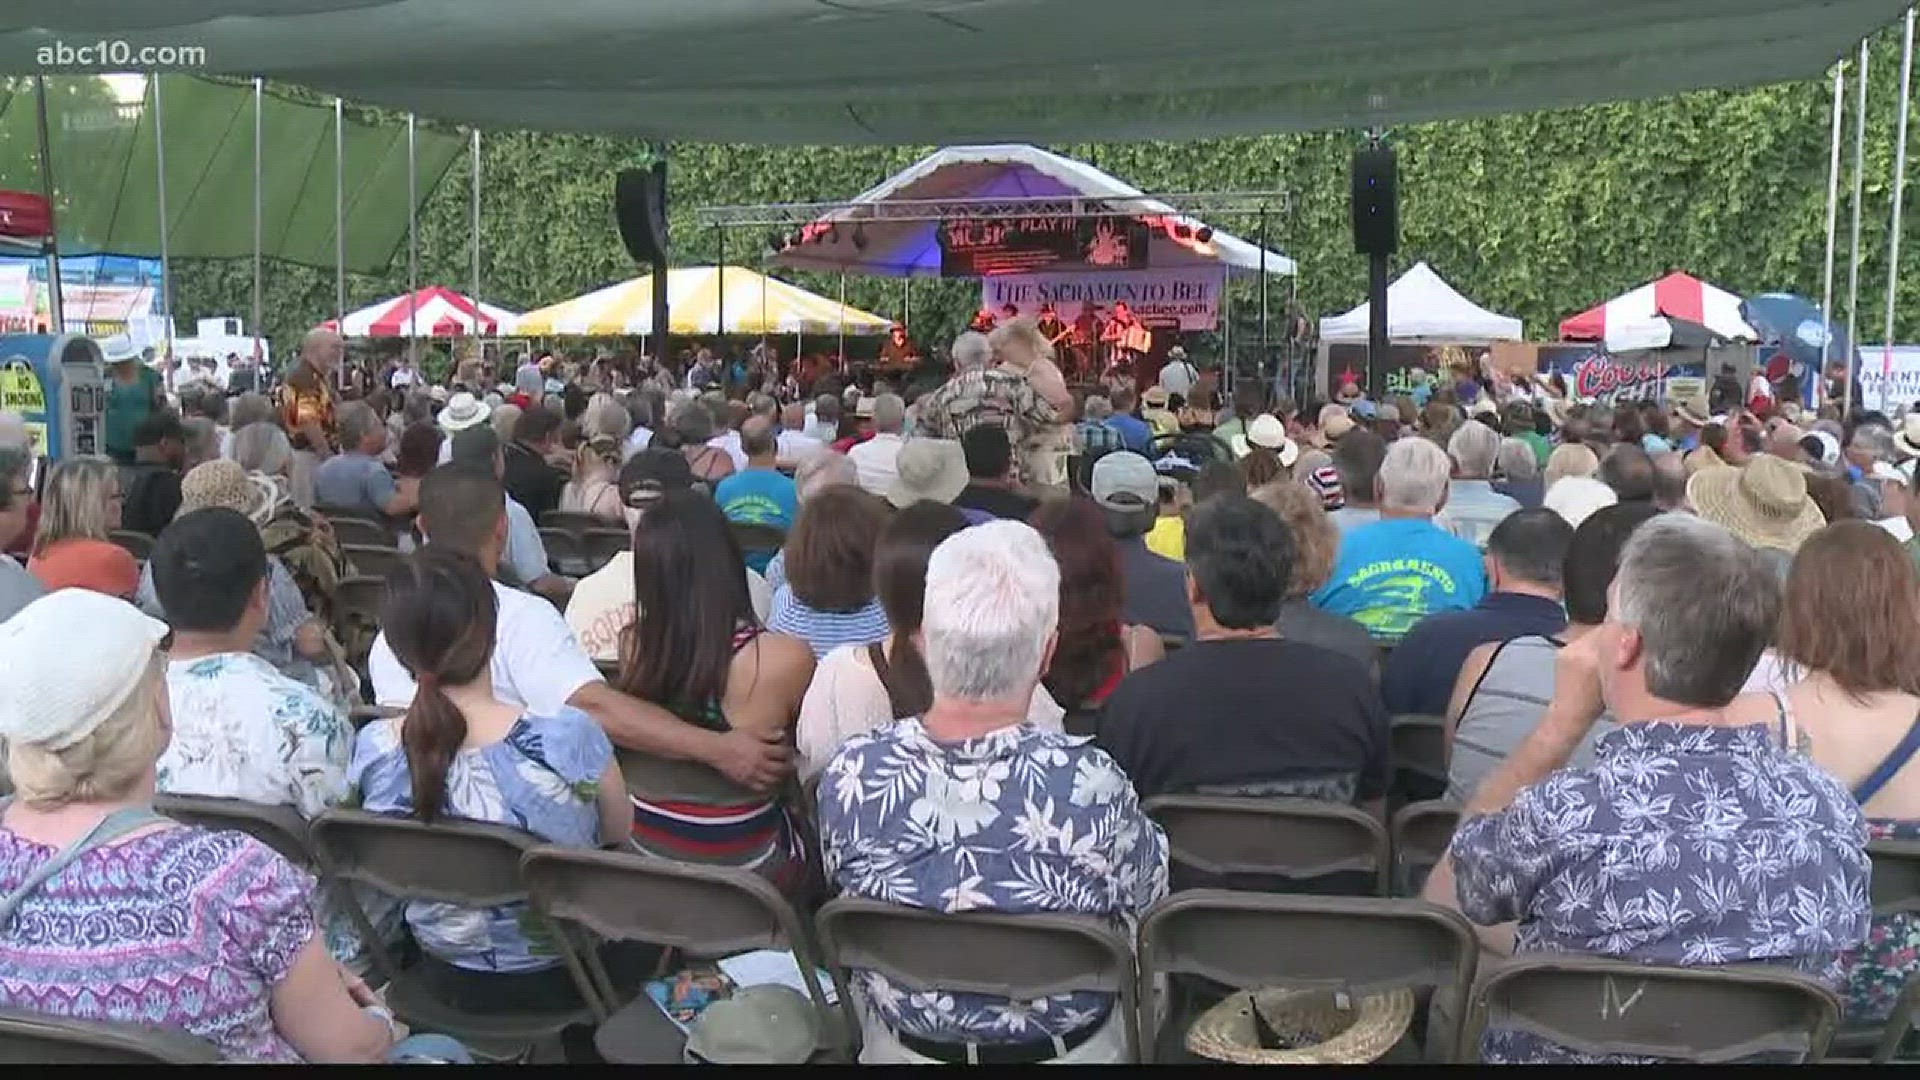 The Sacramento Music Festival is ending after 44 years